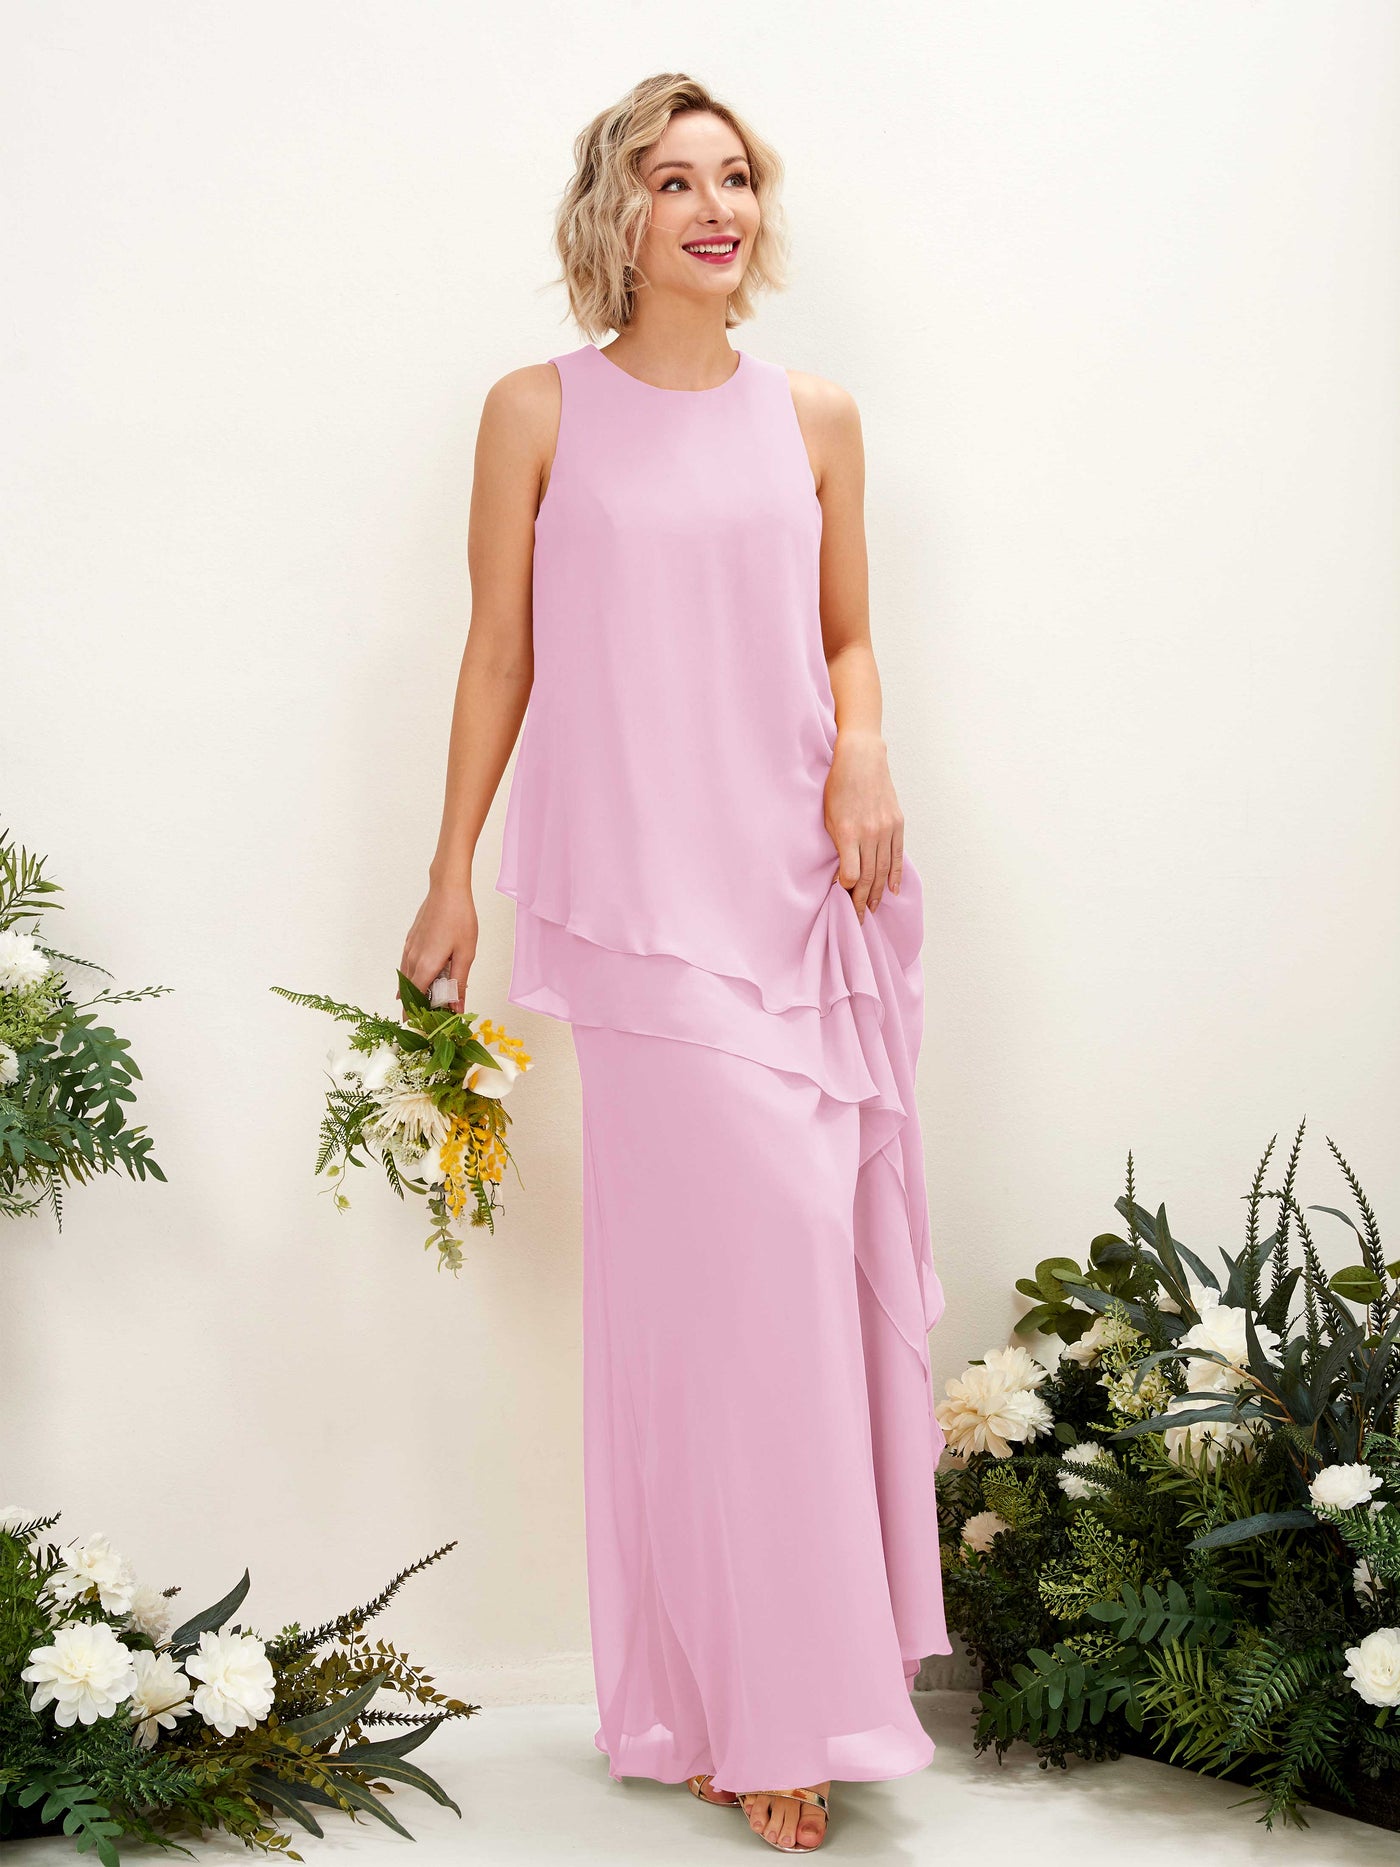 Candy Pink Bridesmaid Dresses Bridesmaid Dress Maternity Chiffon Round Full Length Sleeveless Wedding Party Dress (81222339)#color_candy-pink